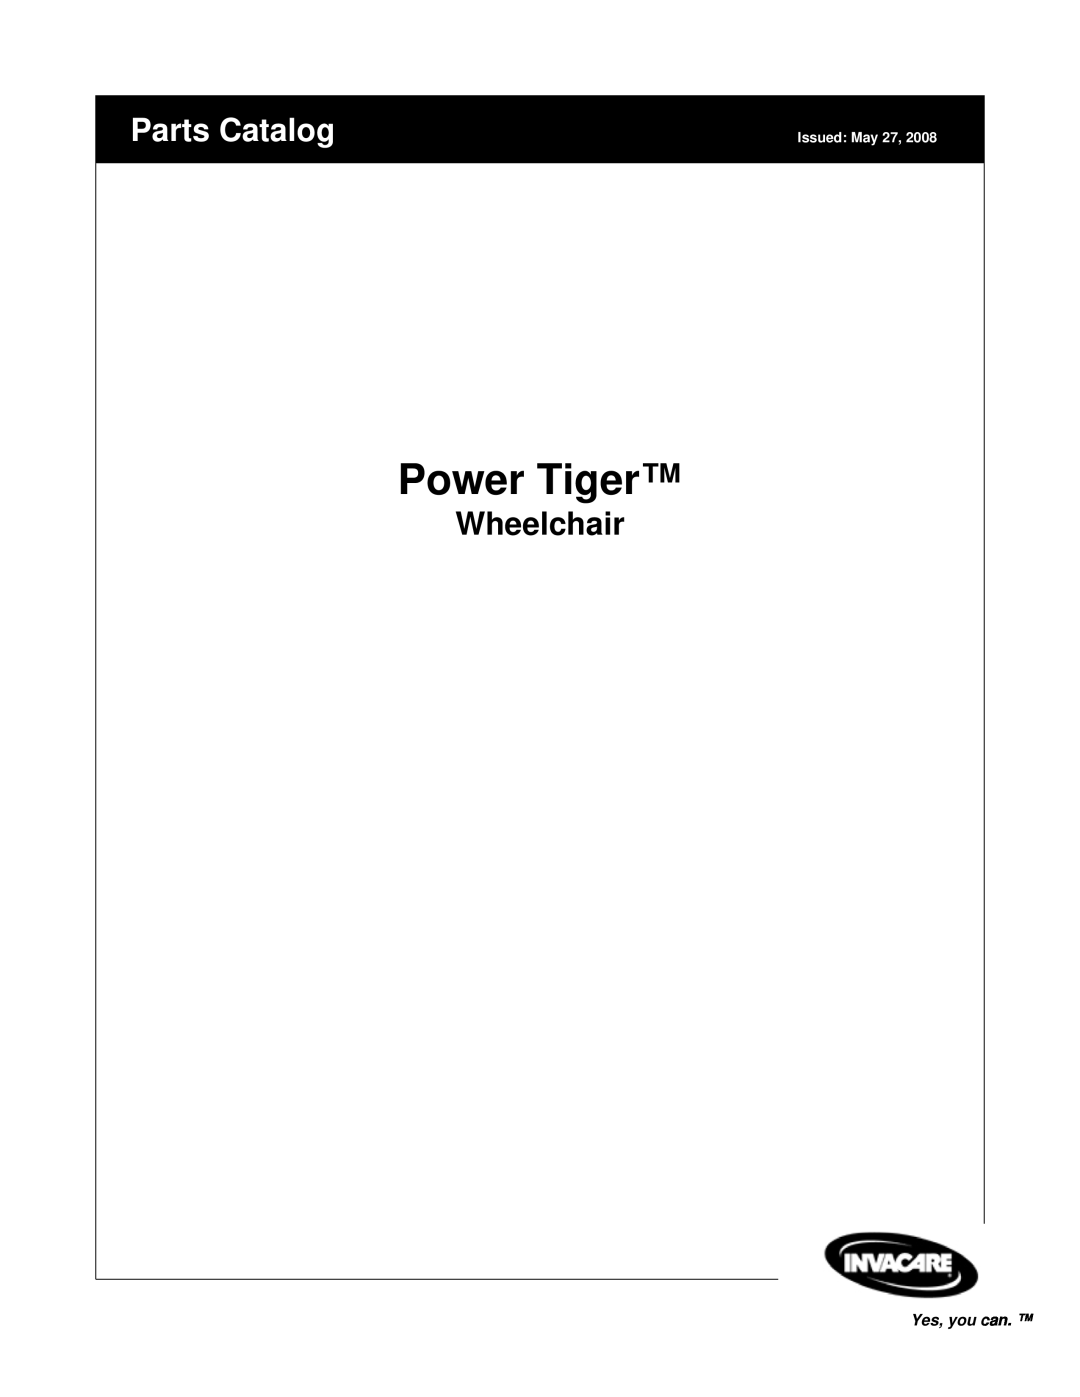 Invacare Power TigerTM manual Wheelchair, Parts Catalog, Yes, you can, Issued May 27 